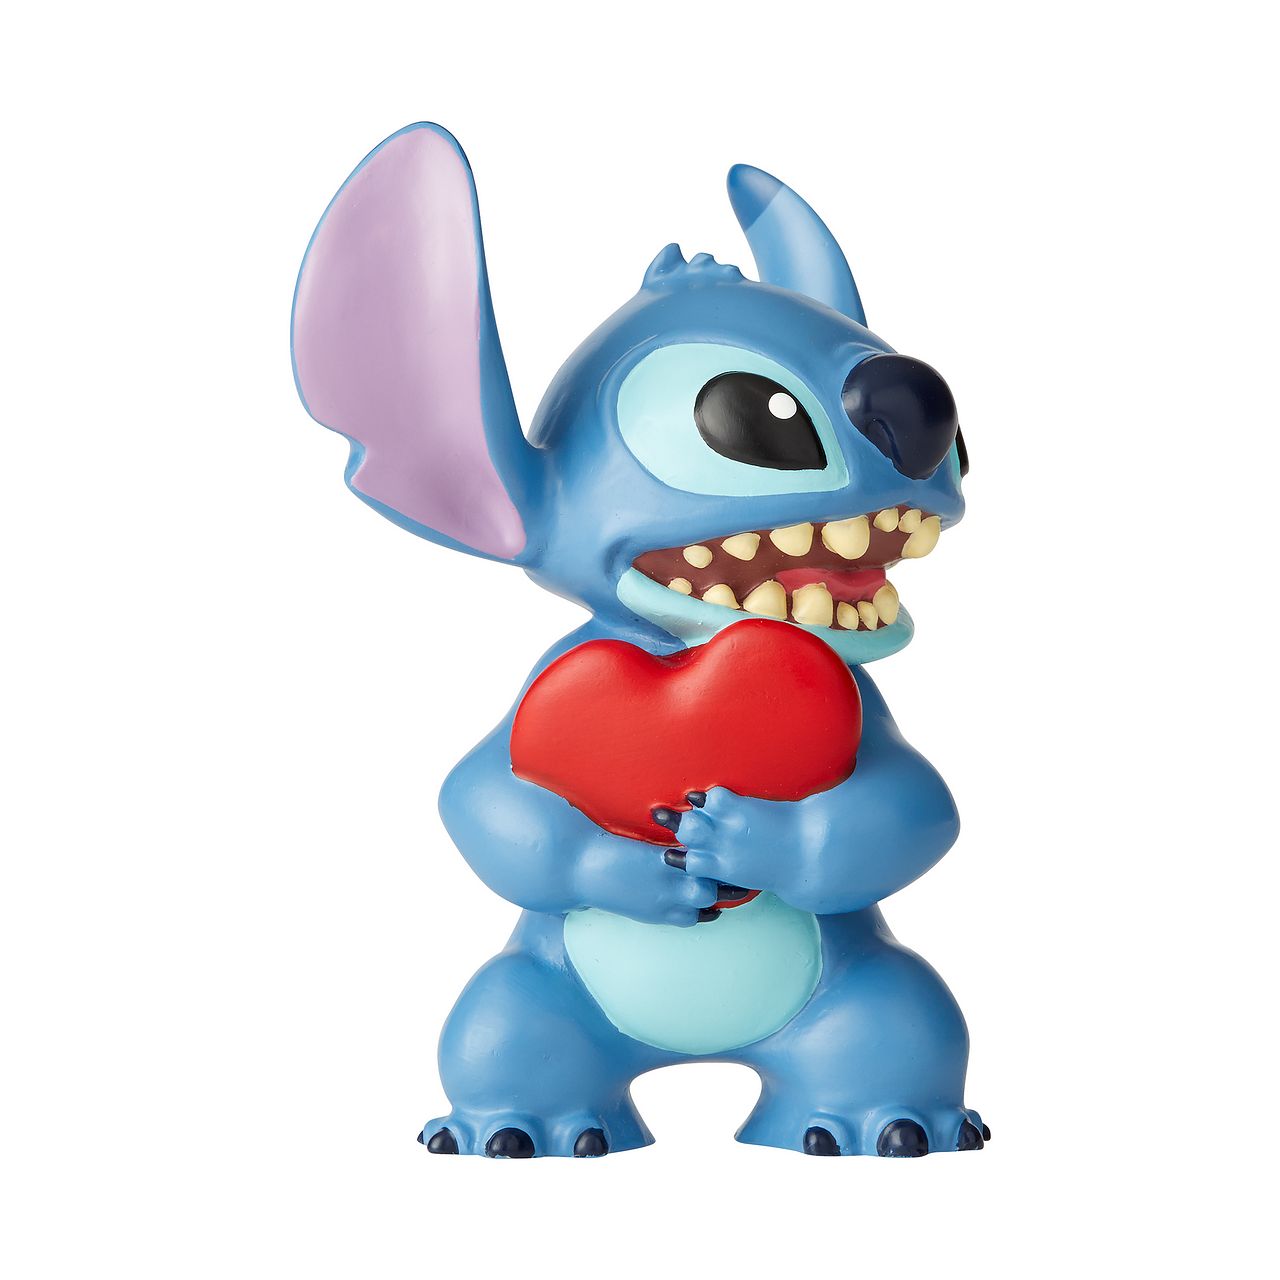  Figurine Disney Traditions Showcase Collection Lilo Et Stitch :  Lilo Et Stitch - Figurine